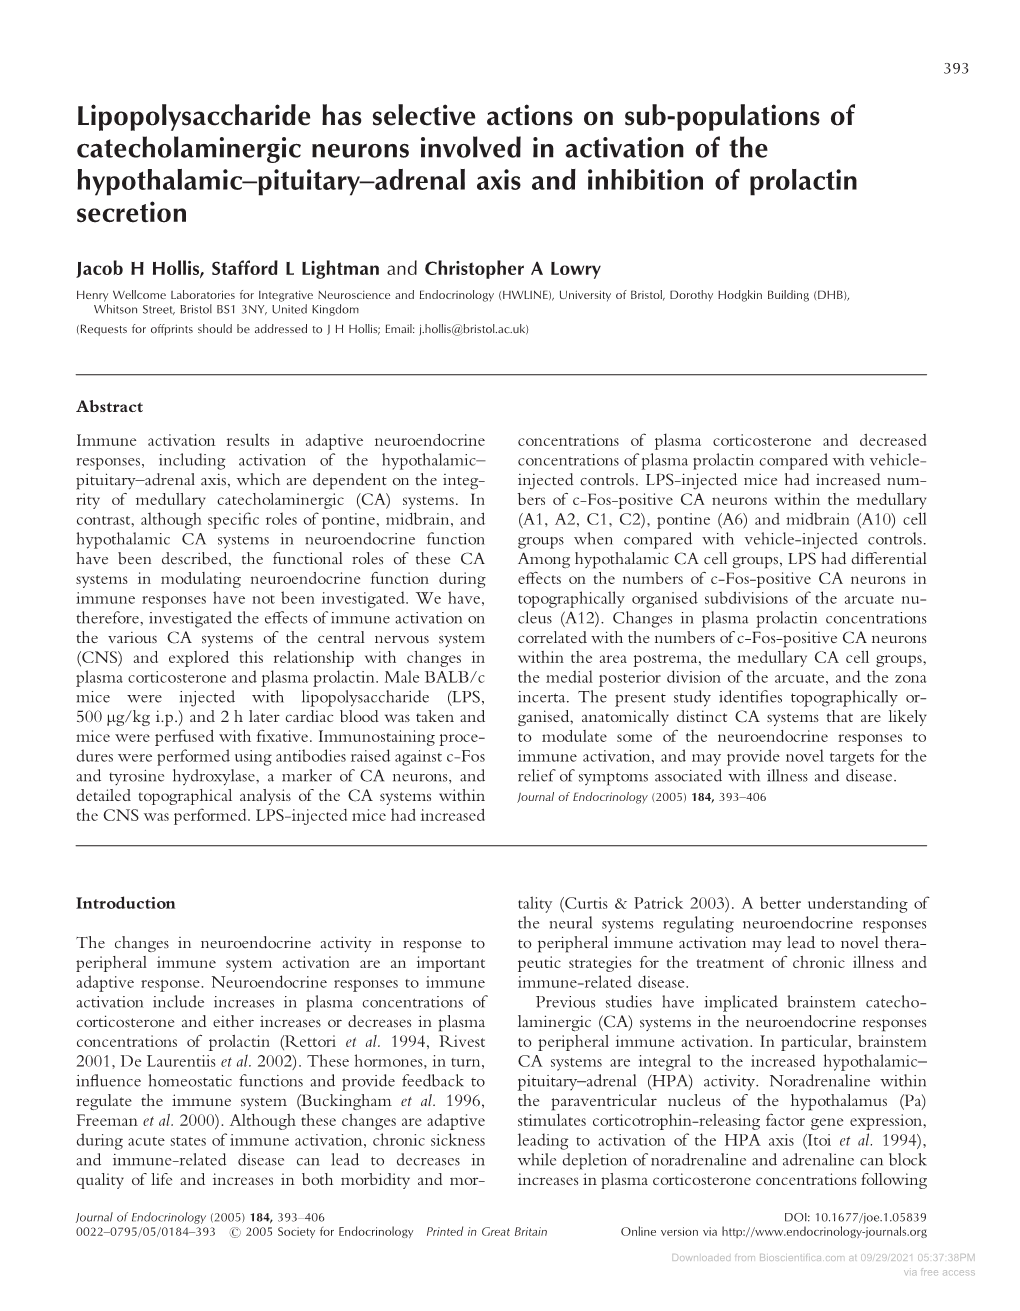 Downloaded from Bioscientifica.Com at 09/29/2021 05:37:38PM Via Free Access 394 J H HOLLIS and Others · LPS Actions on Catecholamine Systems